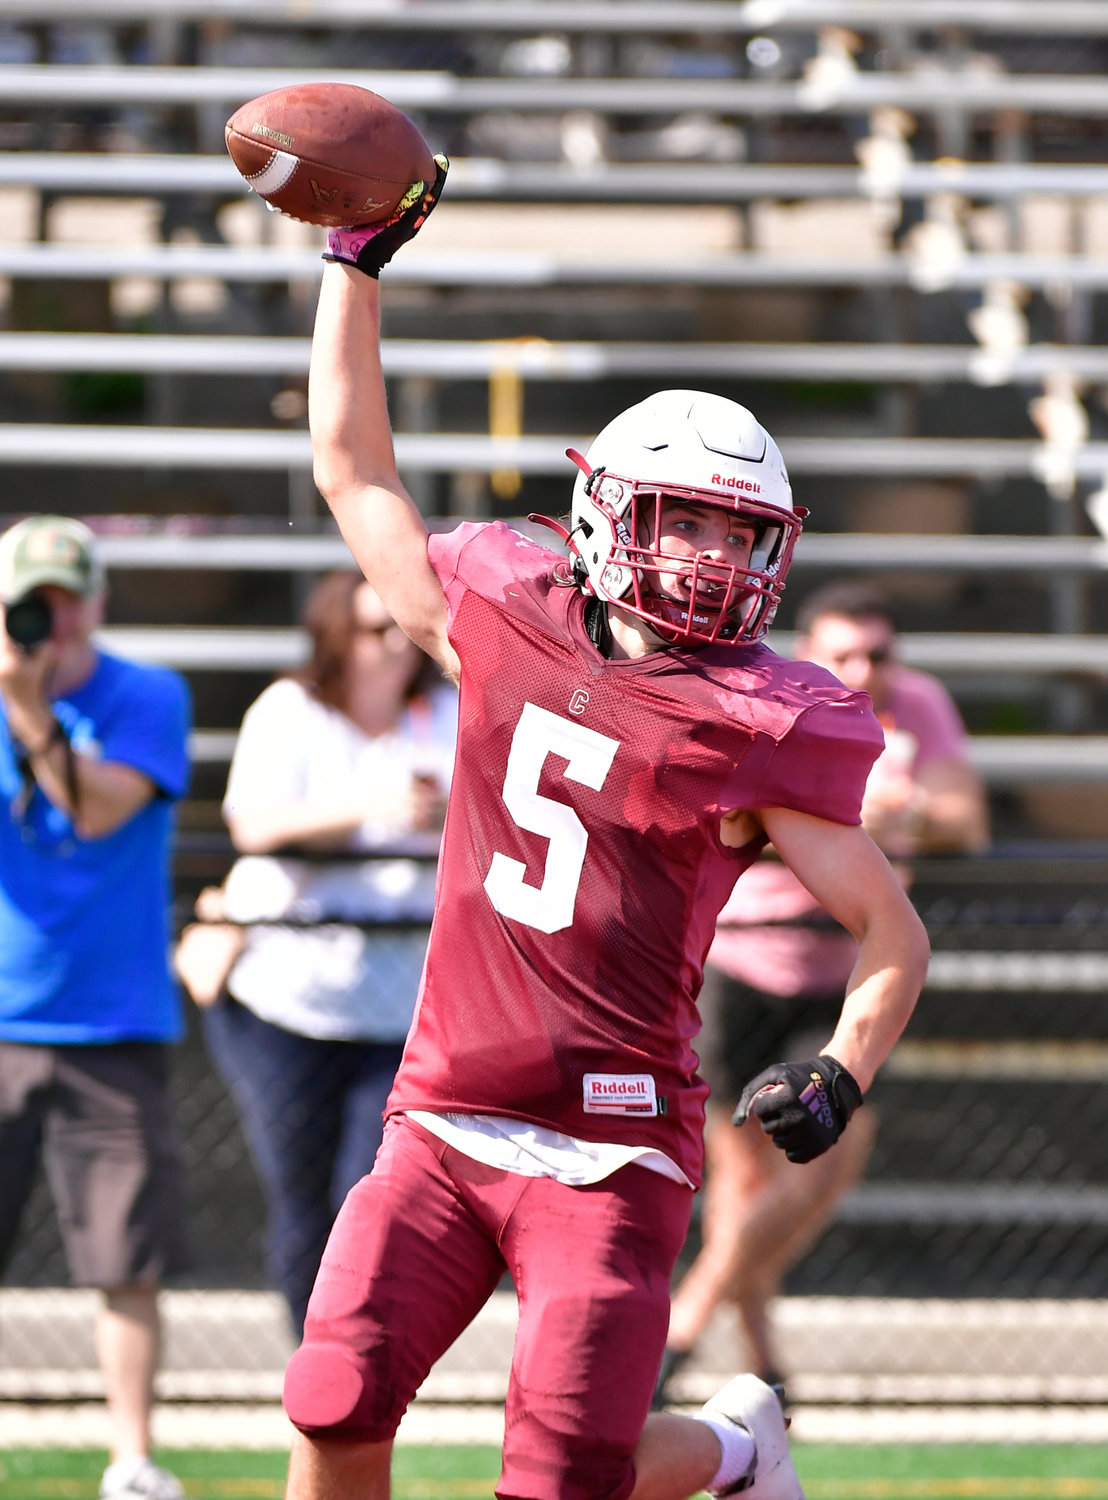 Senior Tom Roche celebrated his second-quarter touchdown that helped the Rams build a 16-point halftime lead in last Saturday’s win.